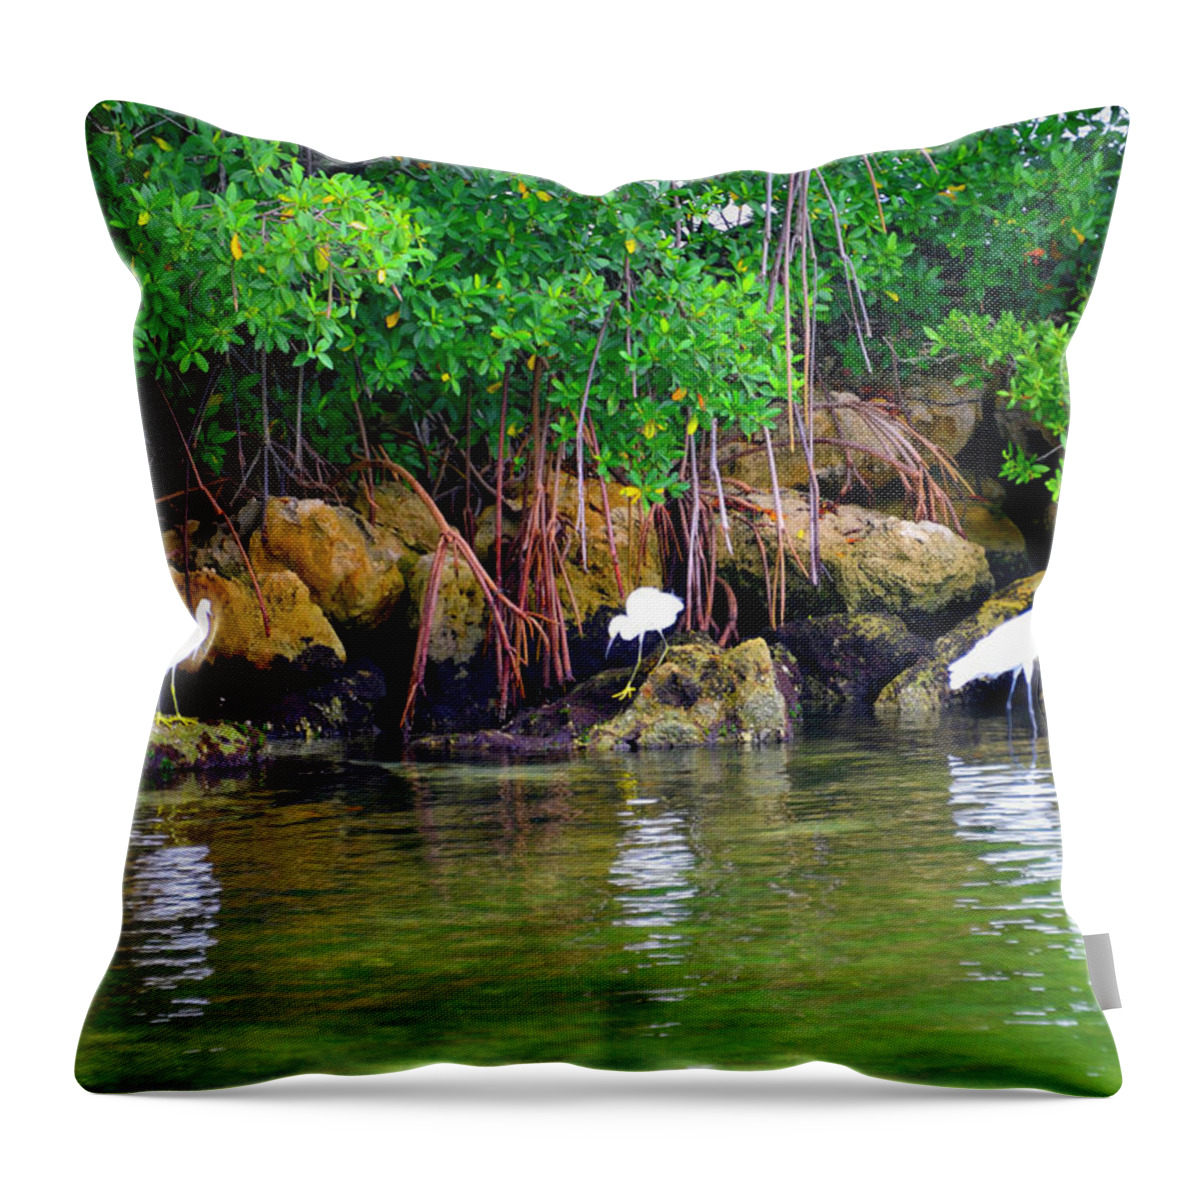 Green Throw Pillow featuring the photograph Going Green by Alison Belsan Horton